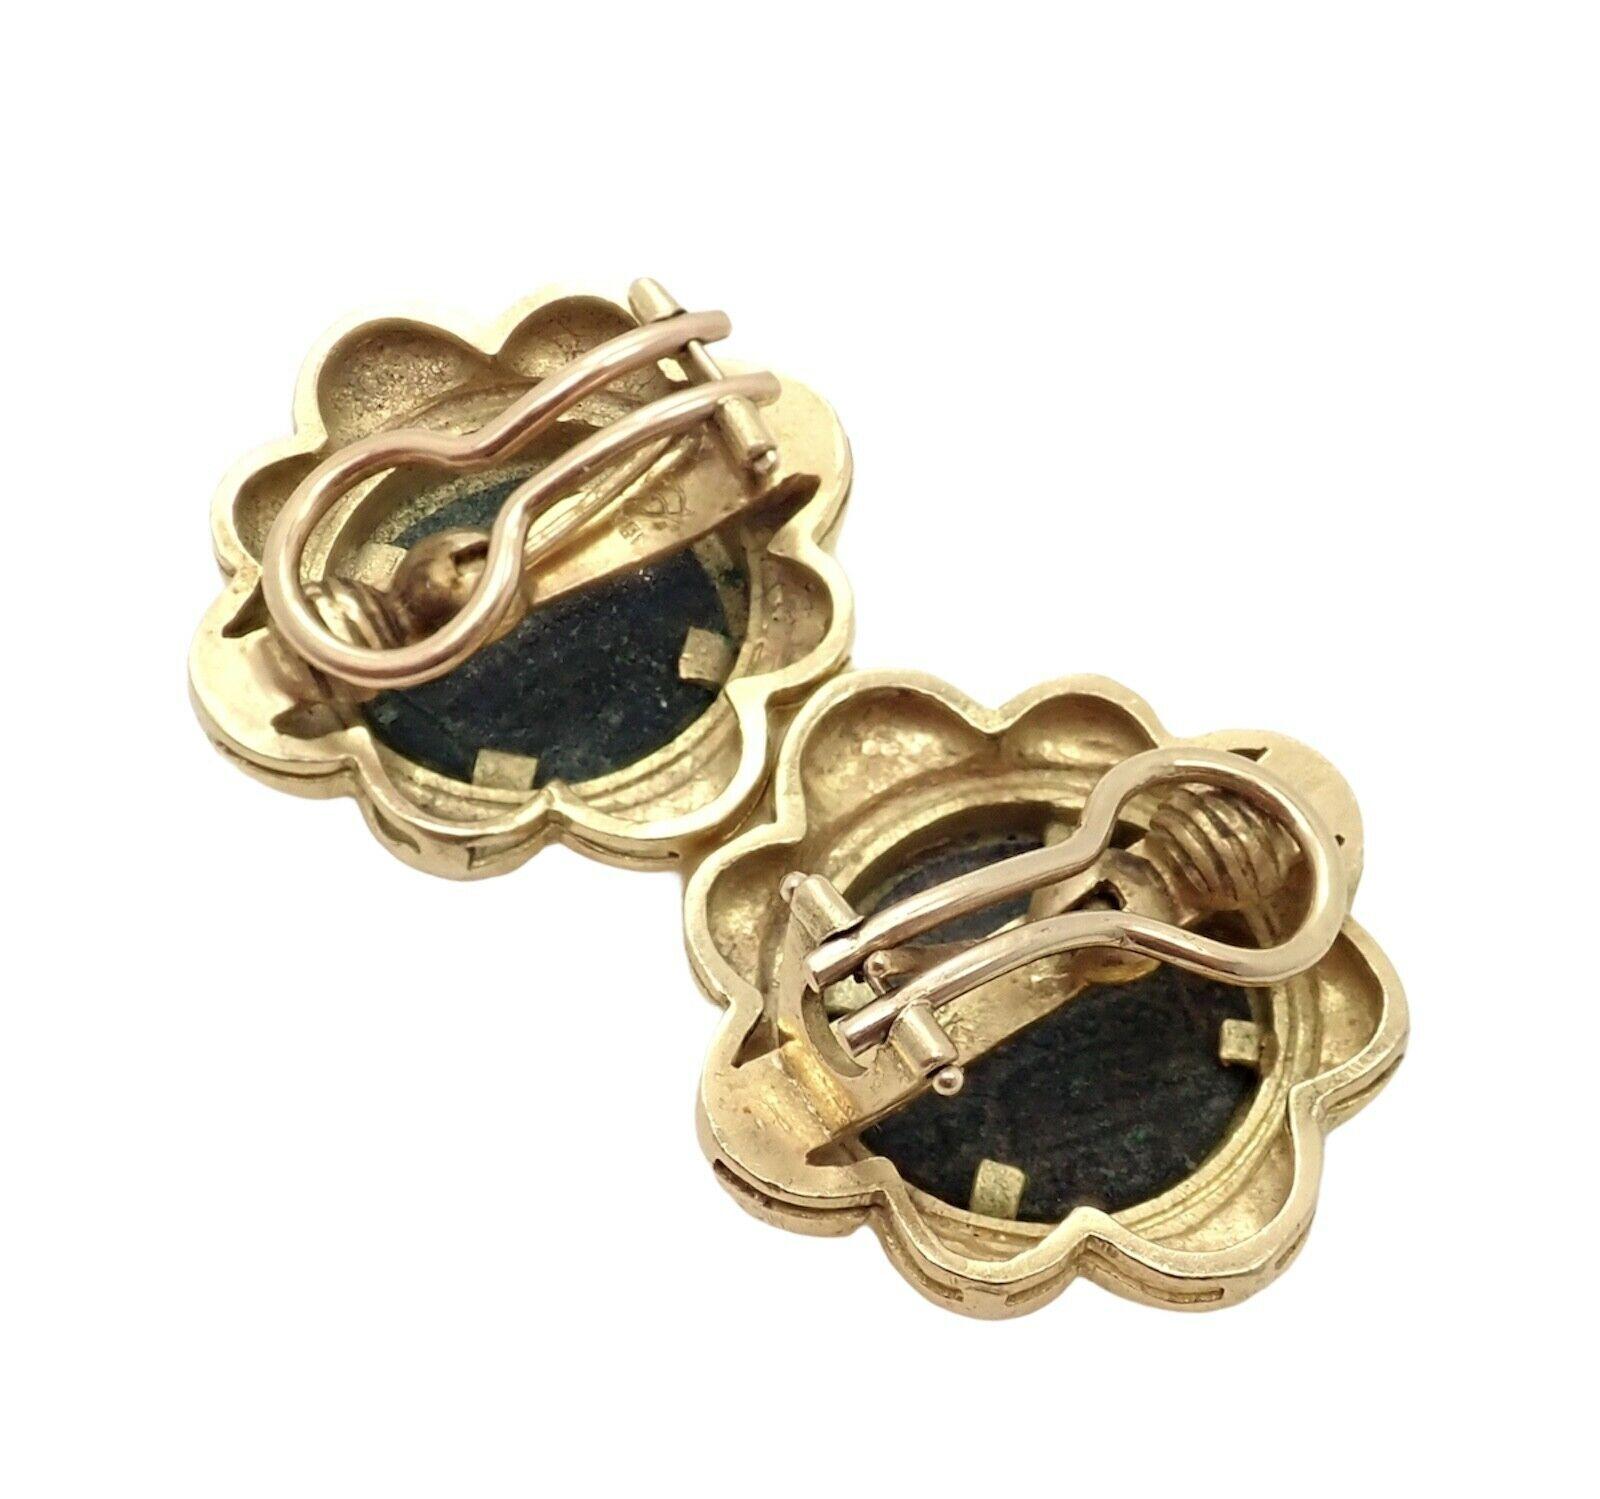 18k Yellow Gold Ancient Coin Earrings by Elizabeth Locke. 
With 2 Ancient Coins 
Collapsible posts with omega backs. 
Details:
Weight: 30.6 grams
Measurements: 30mm
Stamped Hallmarks: 18k Hallmark for Elizabeth Locke
*Free Shipping within the United